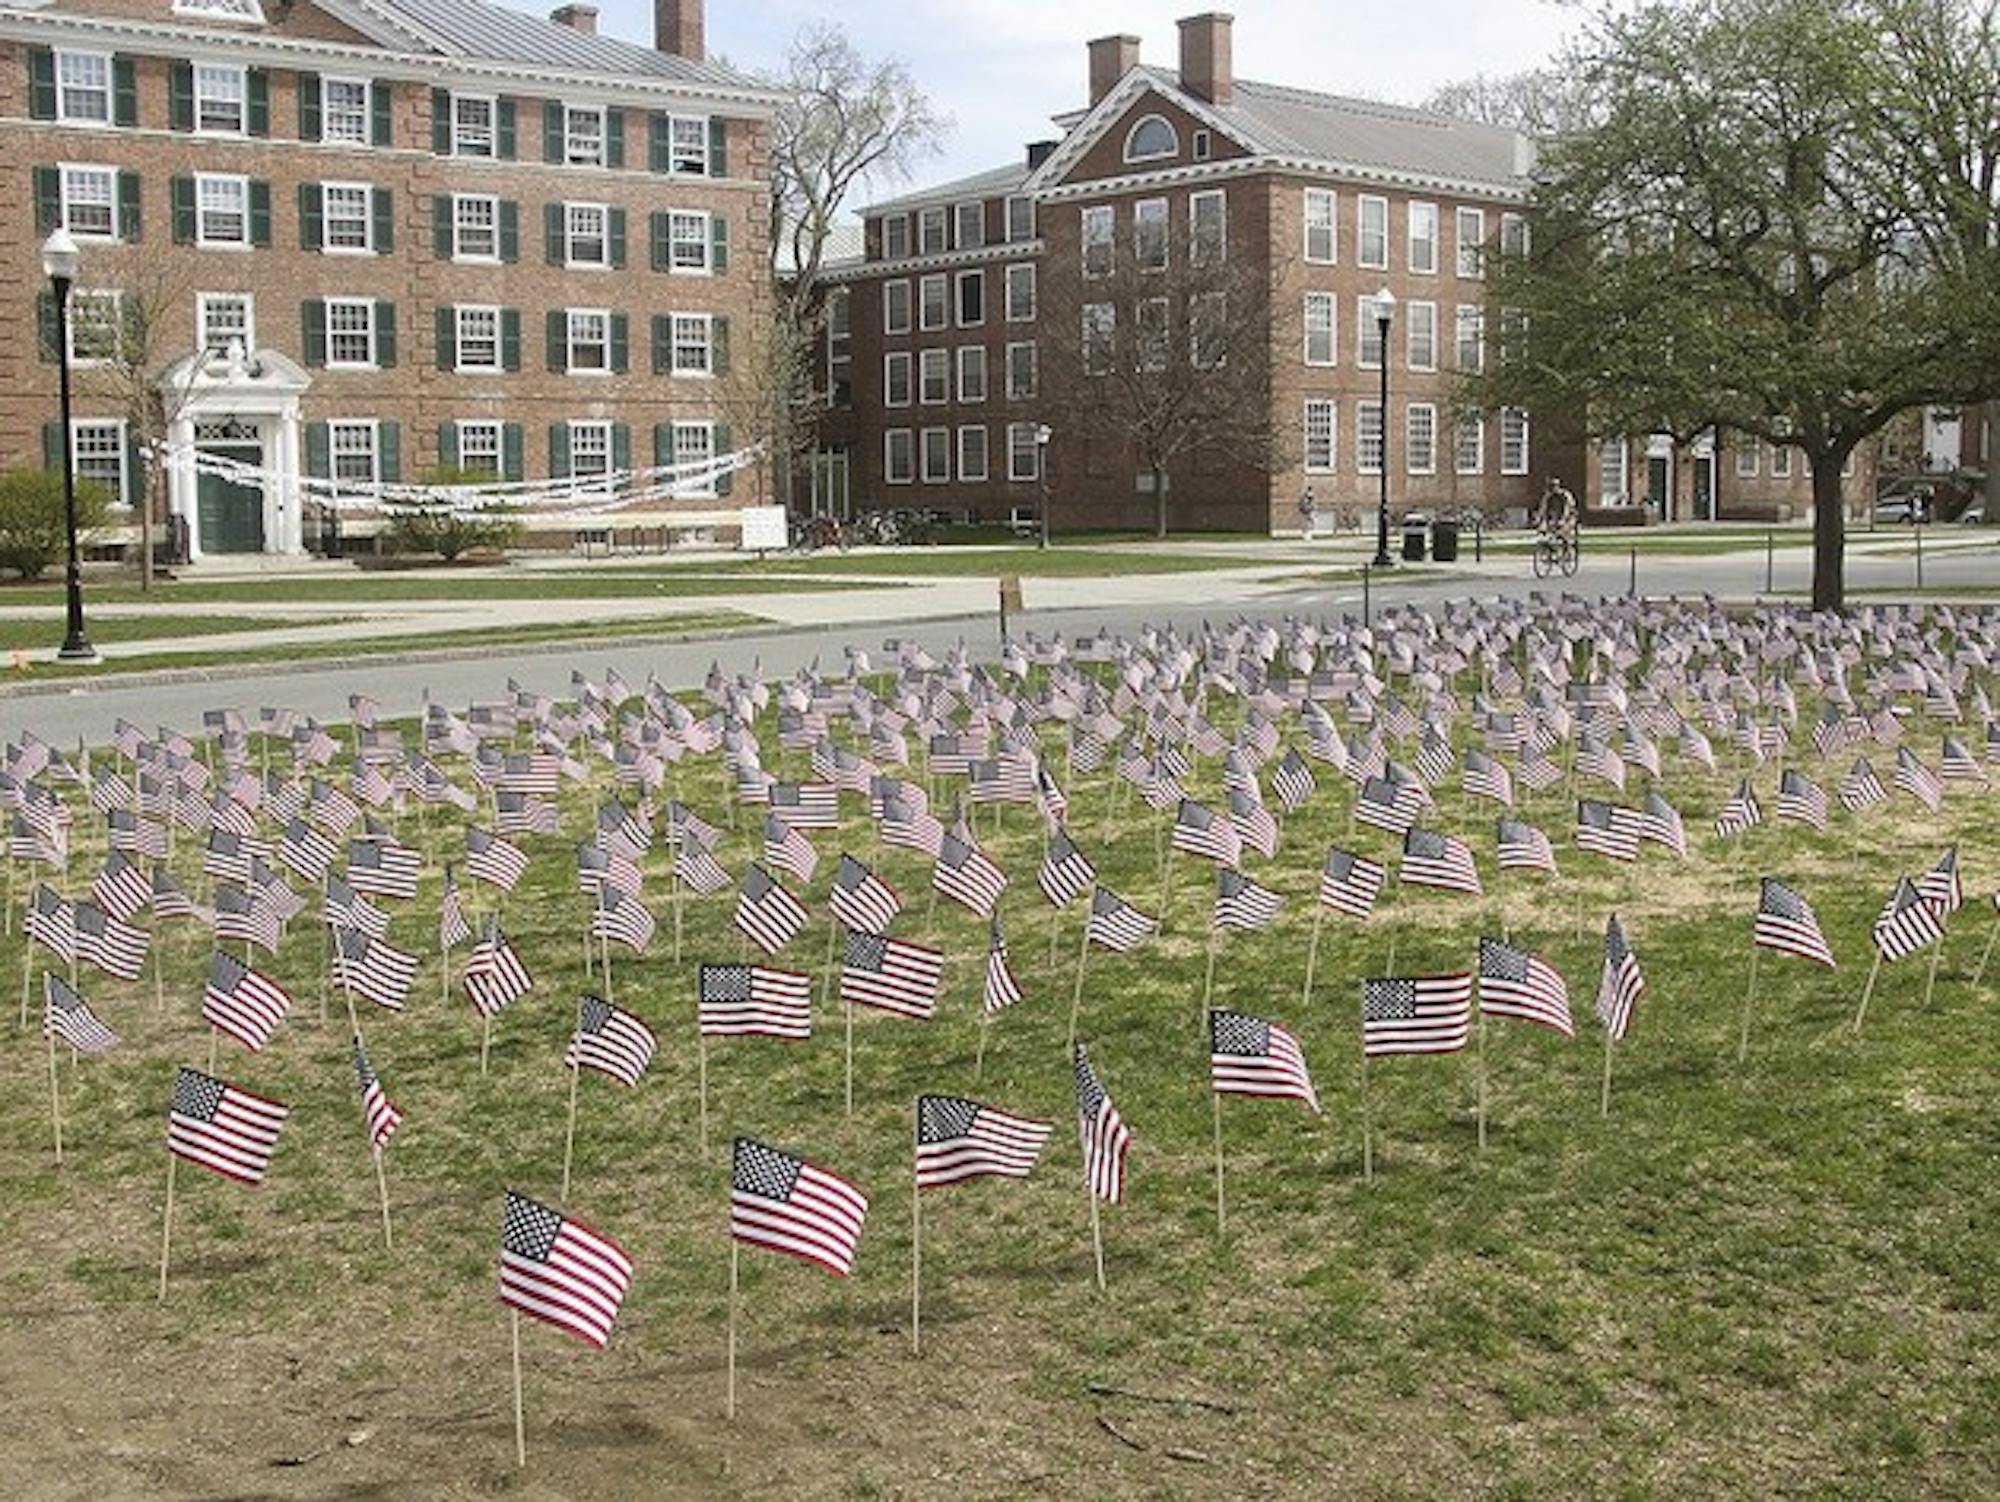 In an attempt to spur discussion about abortion, members of the pro-life organization Vita Clamantis planted 546 flags in the Gold Coast lawn.